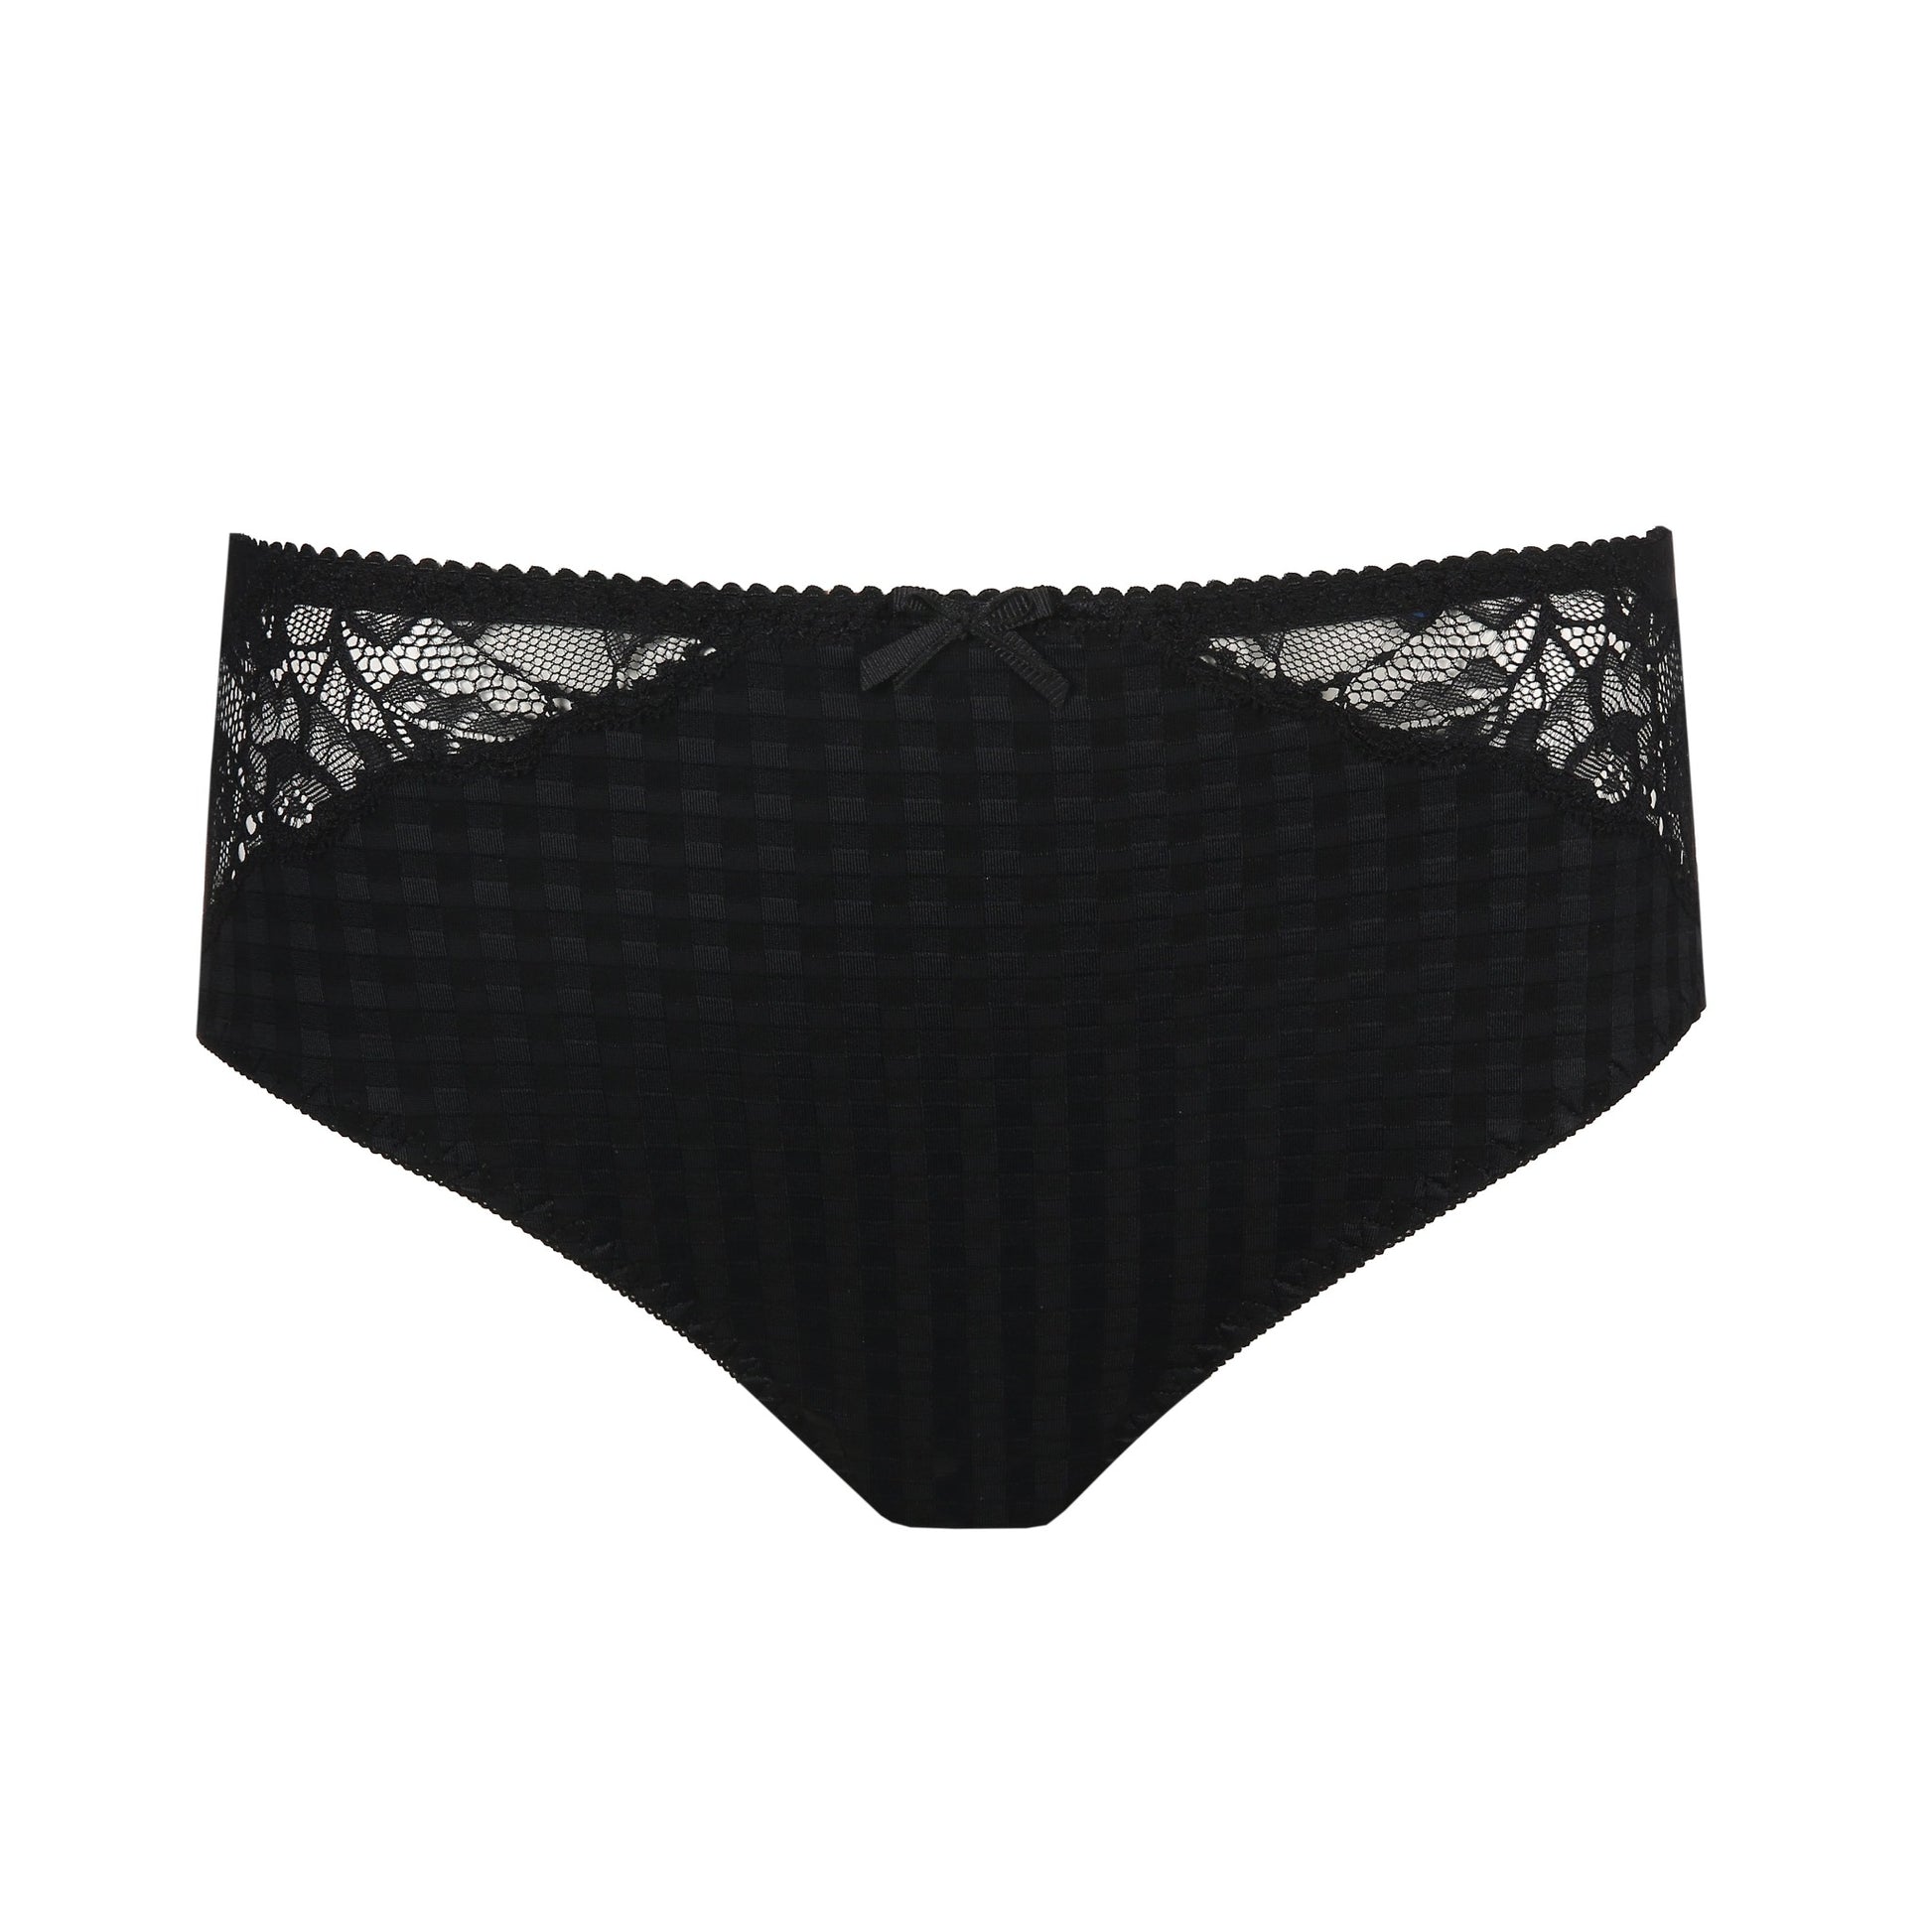 Madison Full Brief panty with lace in Black by PrimaDonna.